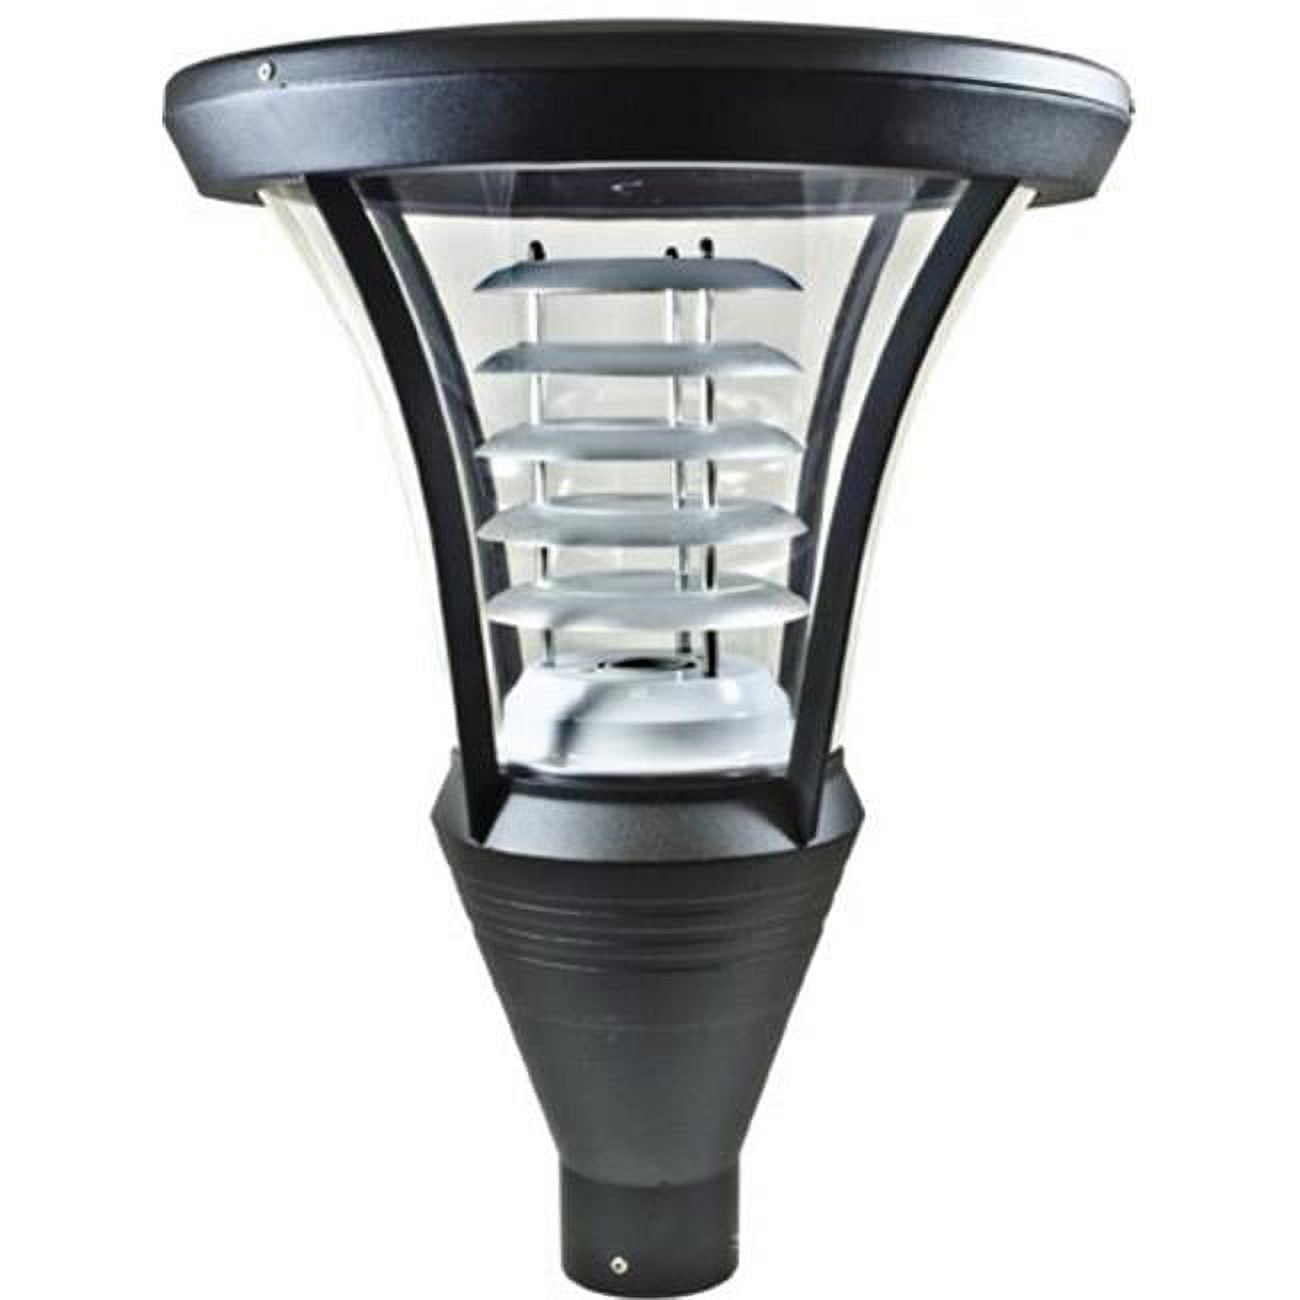 Picture of Dabmar Lighting GM645-B 50W 120V Powder Coated Cast Aluminum Post Top Light Fixture with Metal Halide Lamp, Black - 22.75 x 17.25 x 17.25 in.